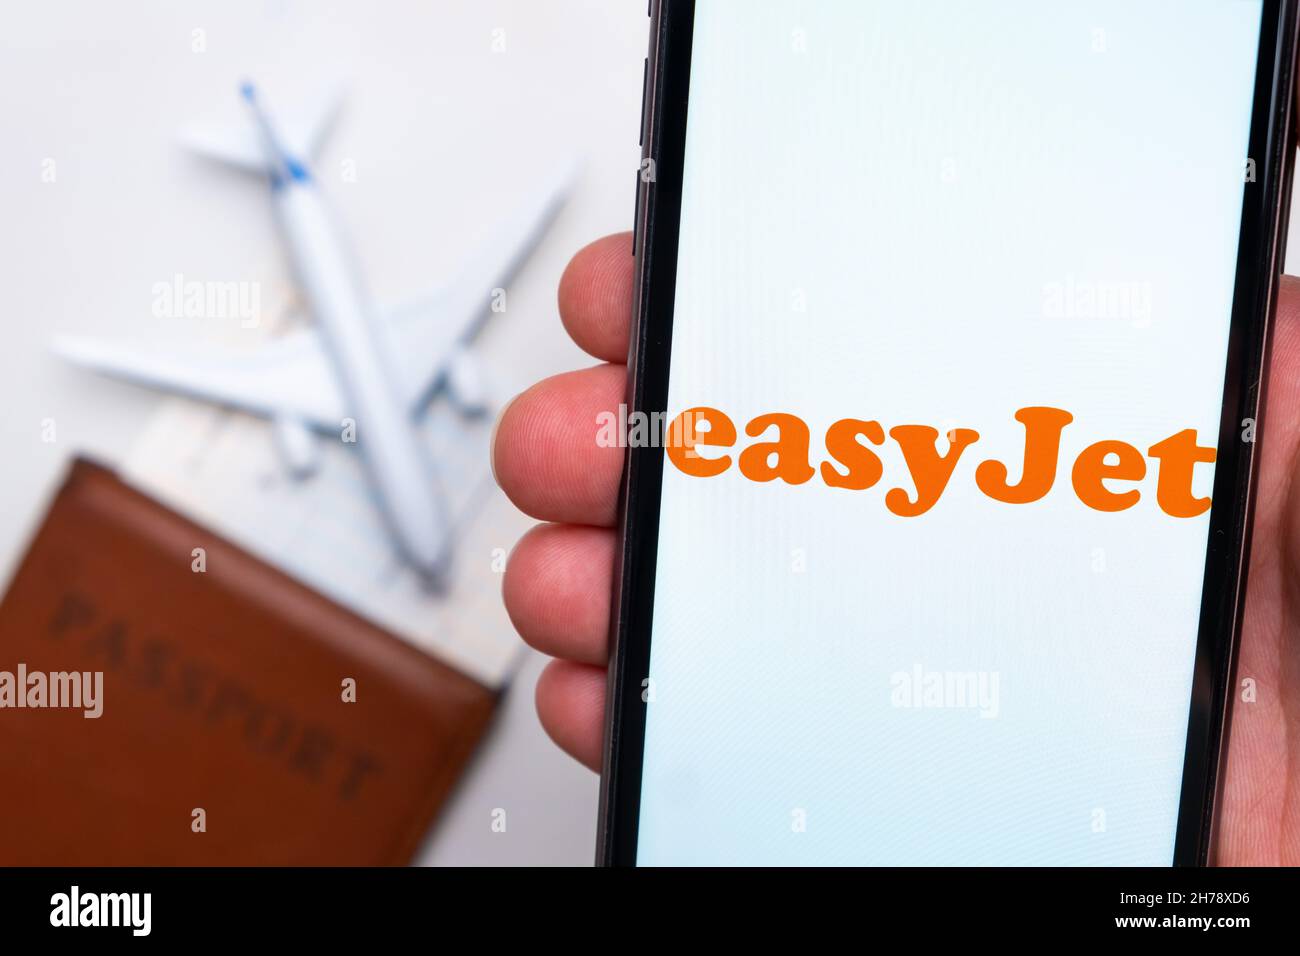 EasyJet Airline app on a smartphone screen with a plane and passport on the background. The concept of travel app. November 2021, San Francisco, USA Stock Photo